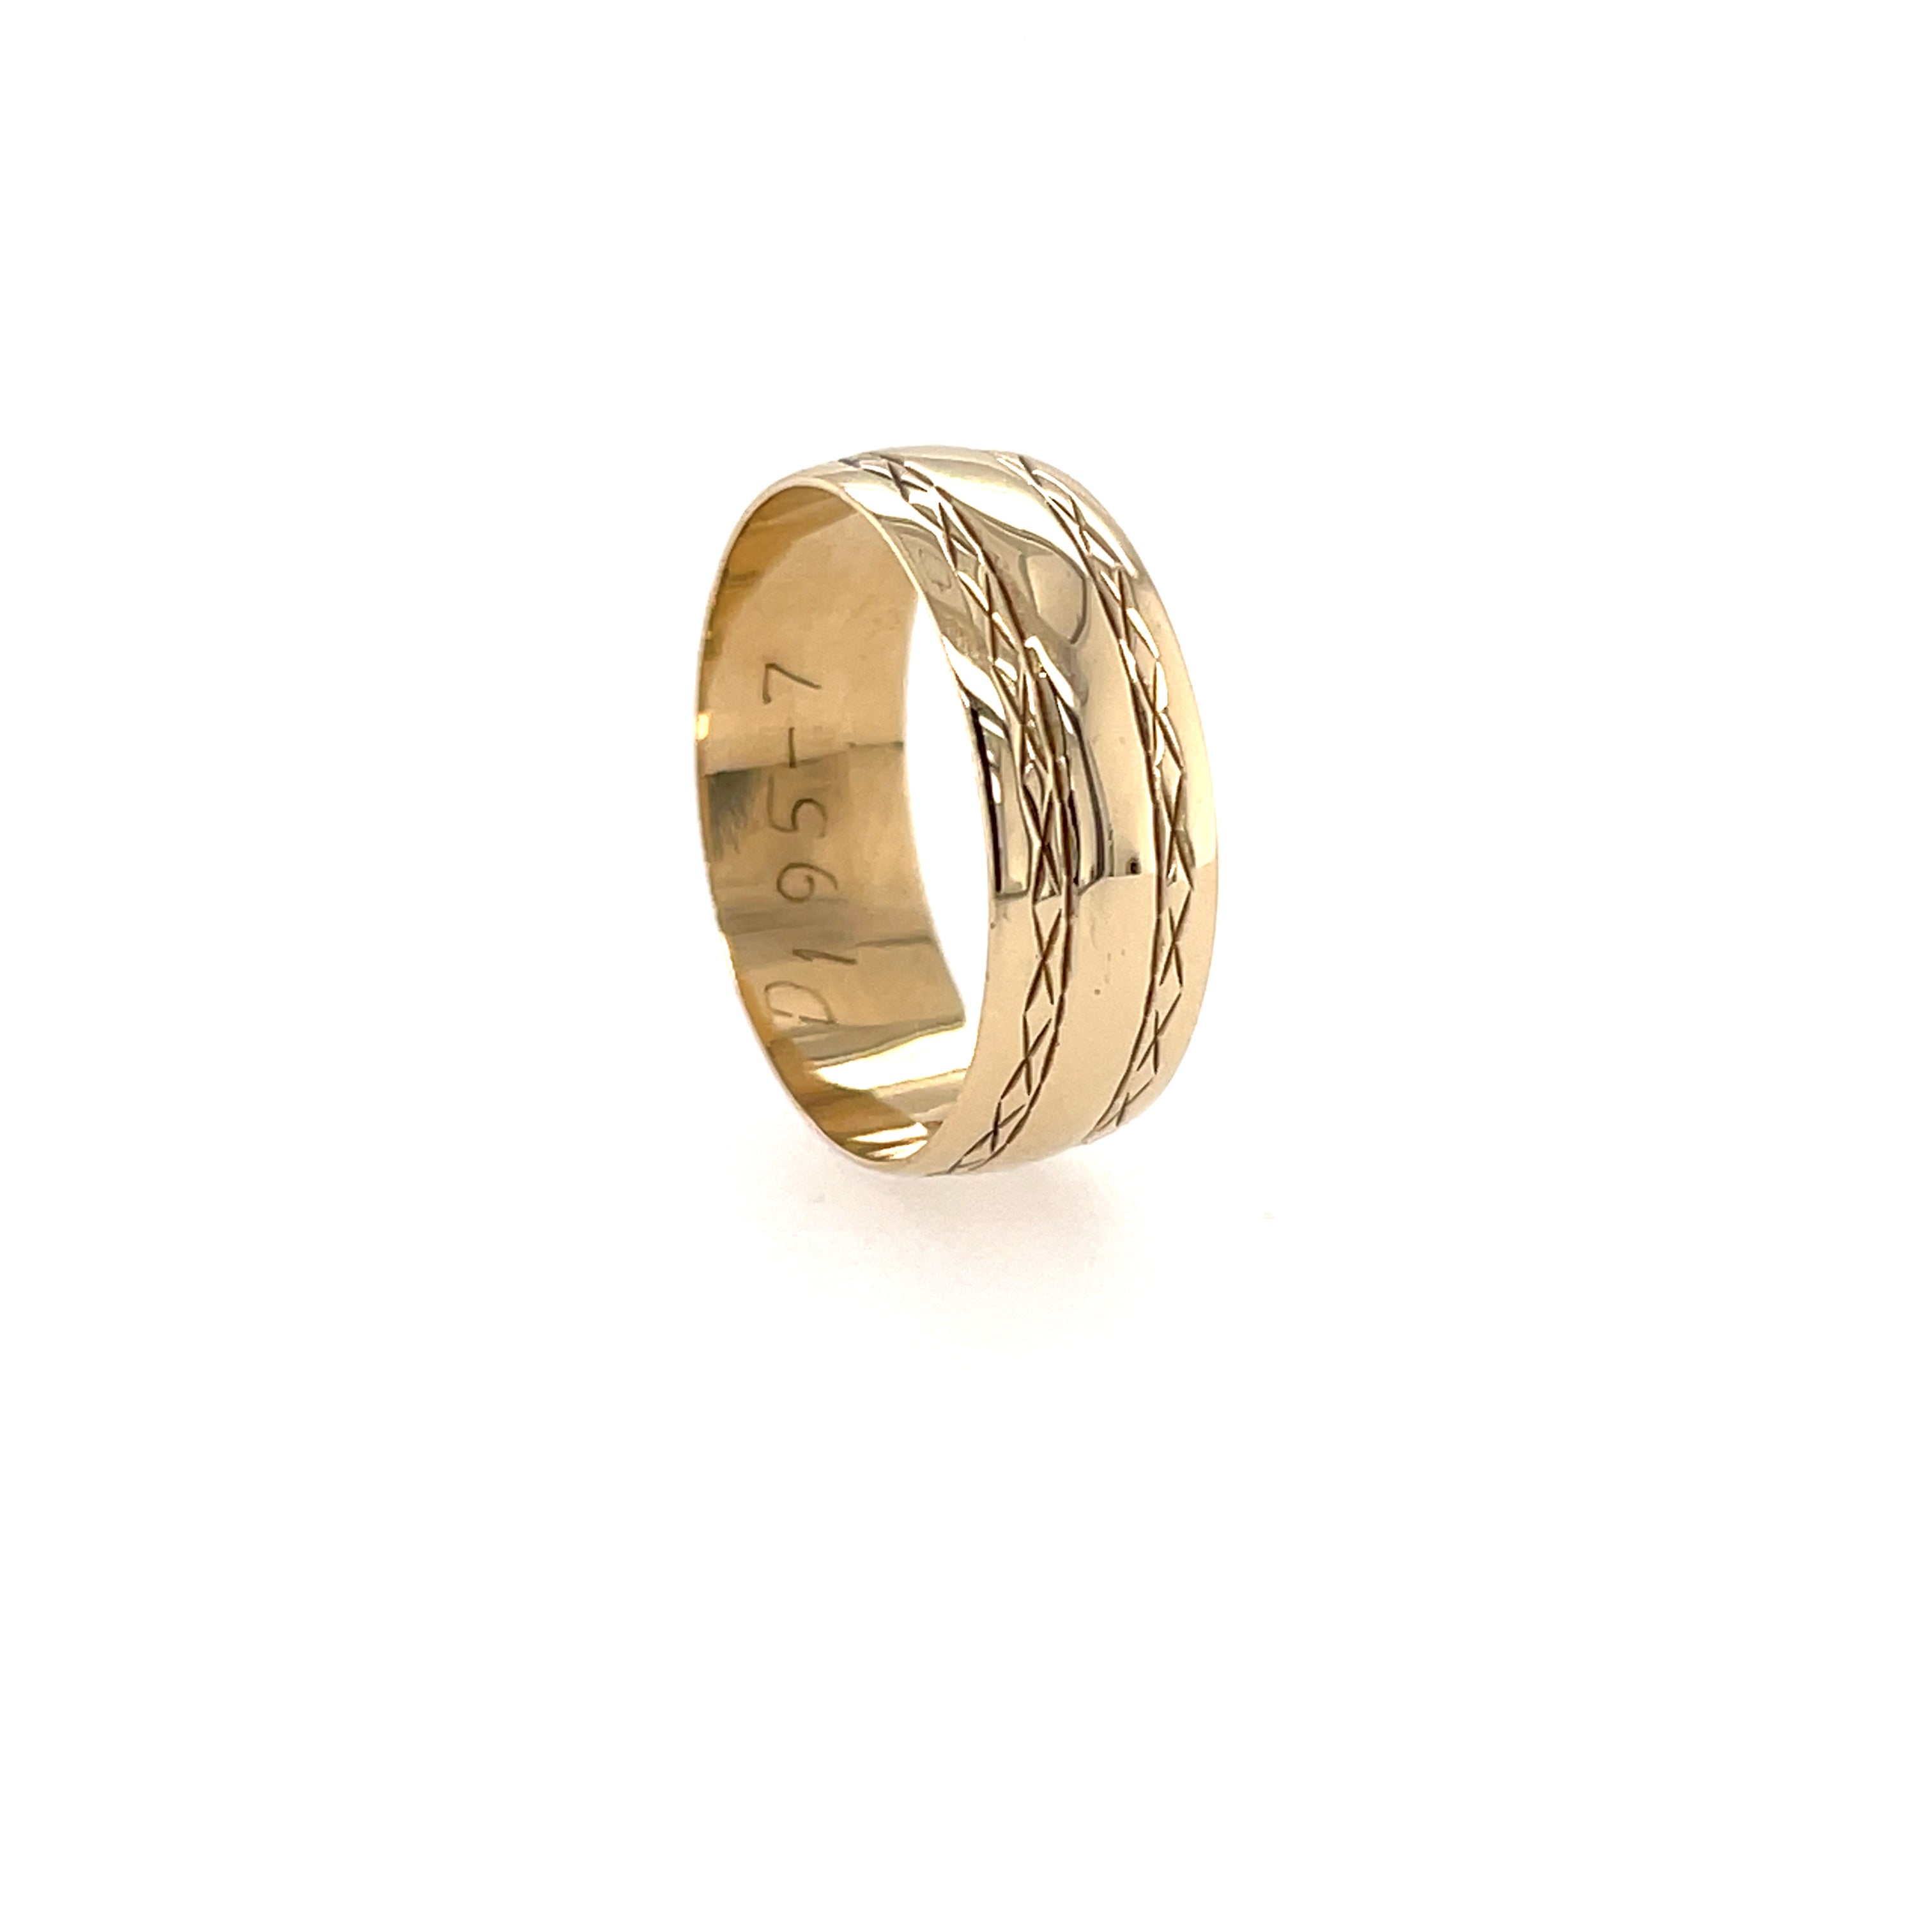 9ct Yellow Gold 6mm Patterned Wedding Band Ring - Size O SOLD